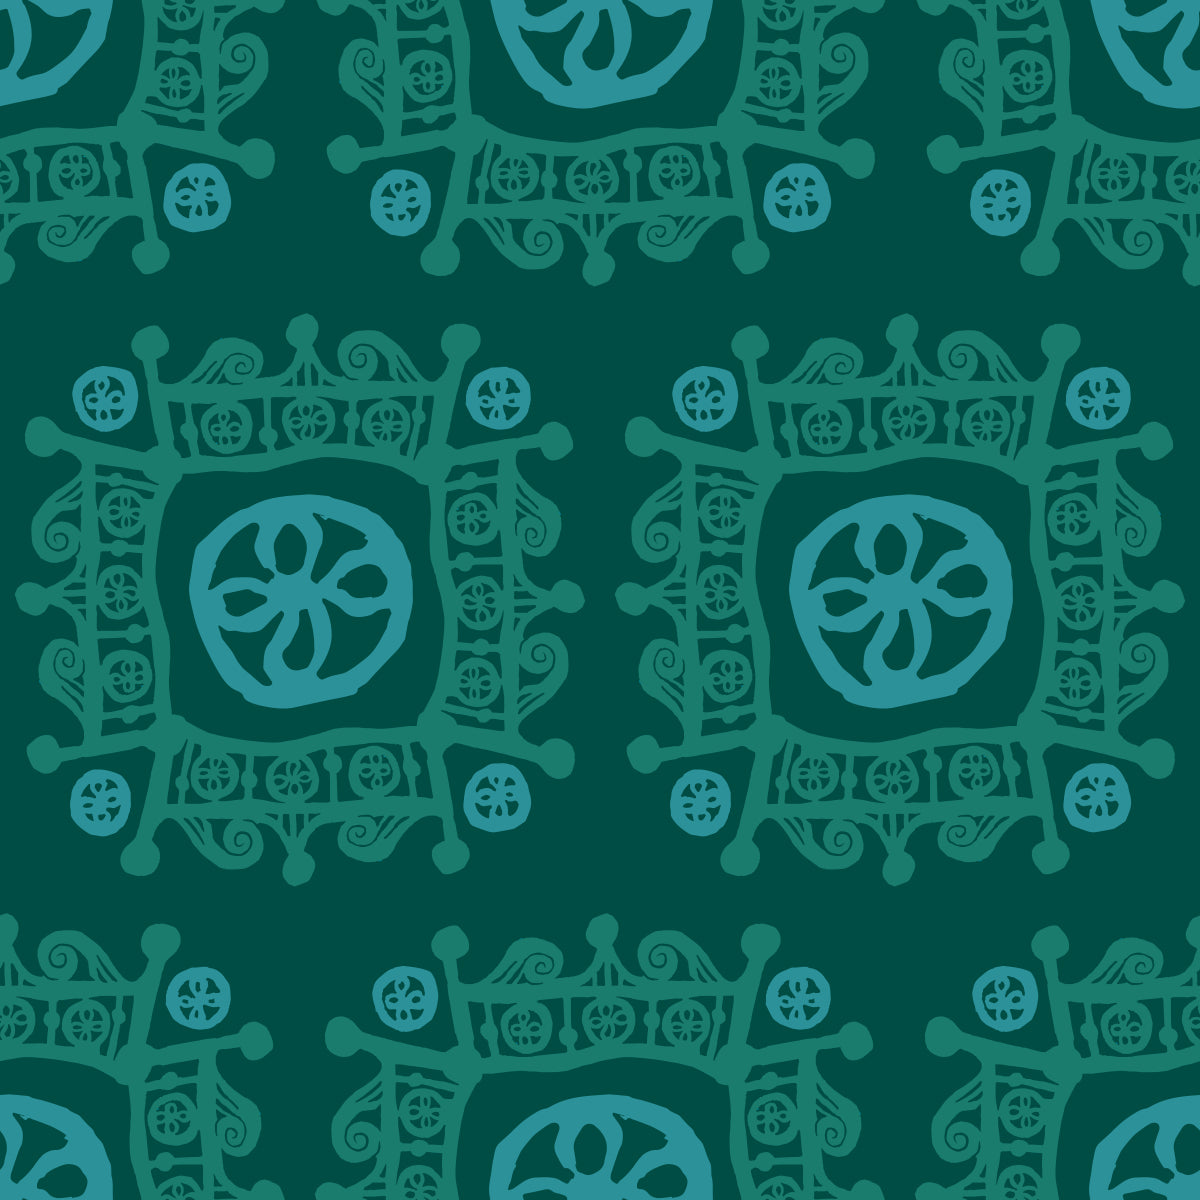 Rock on Royal Spruce features a repeating pattern in green colors of hand-drawn flowers encased in ornate squares bordered by crown-like flourishes.